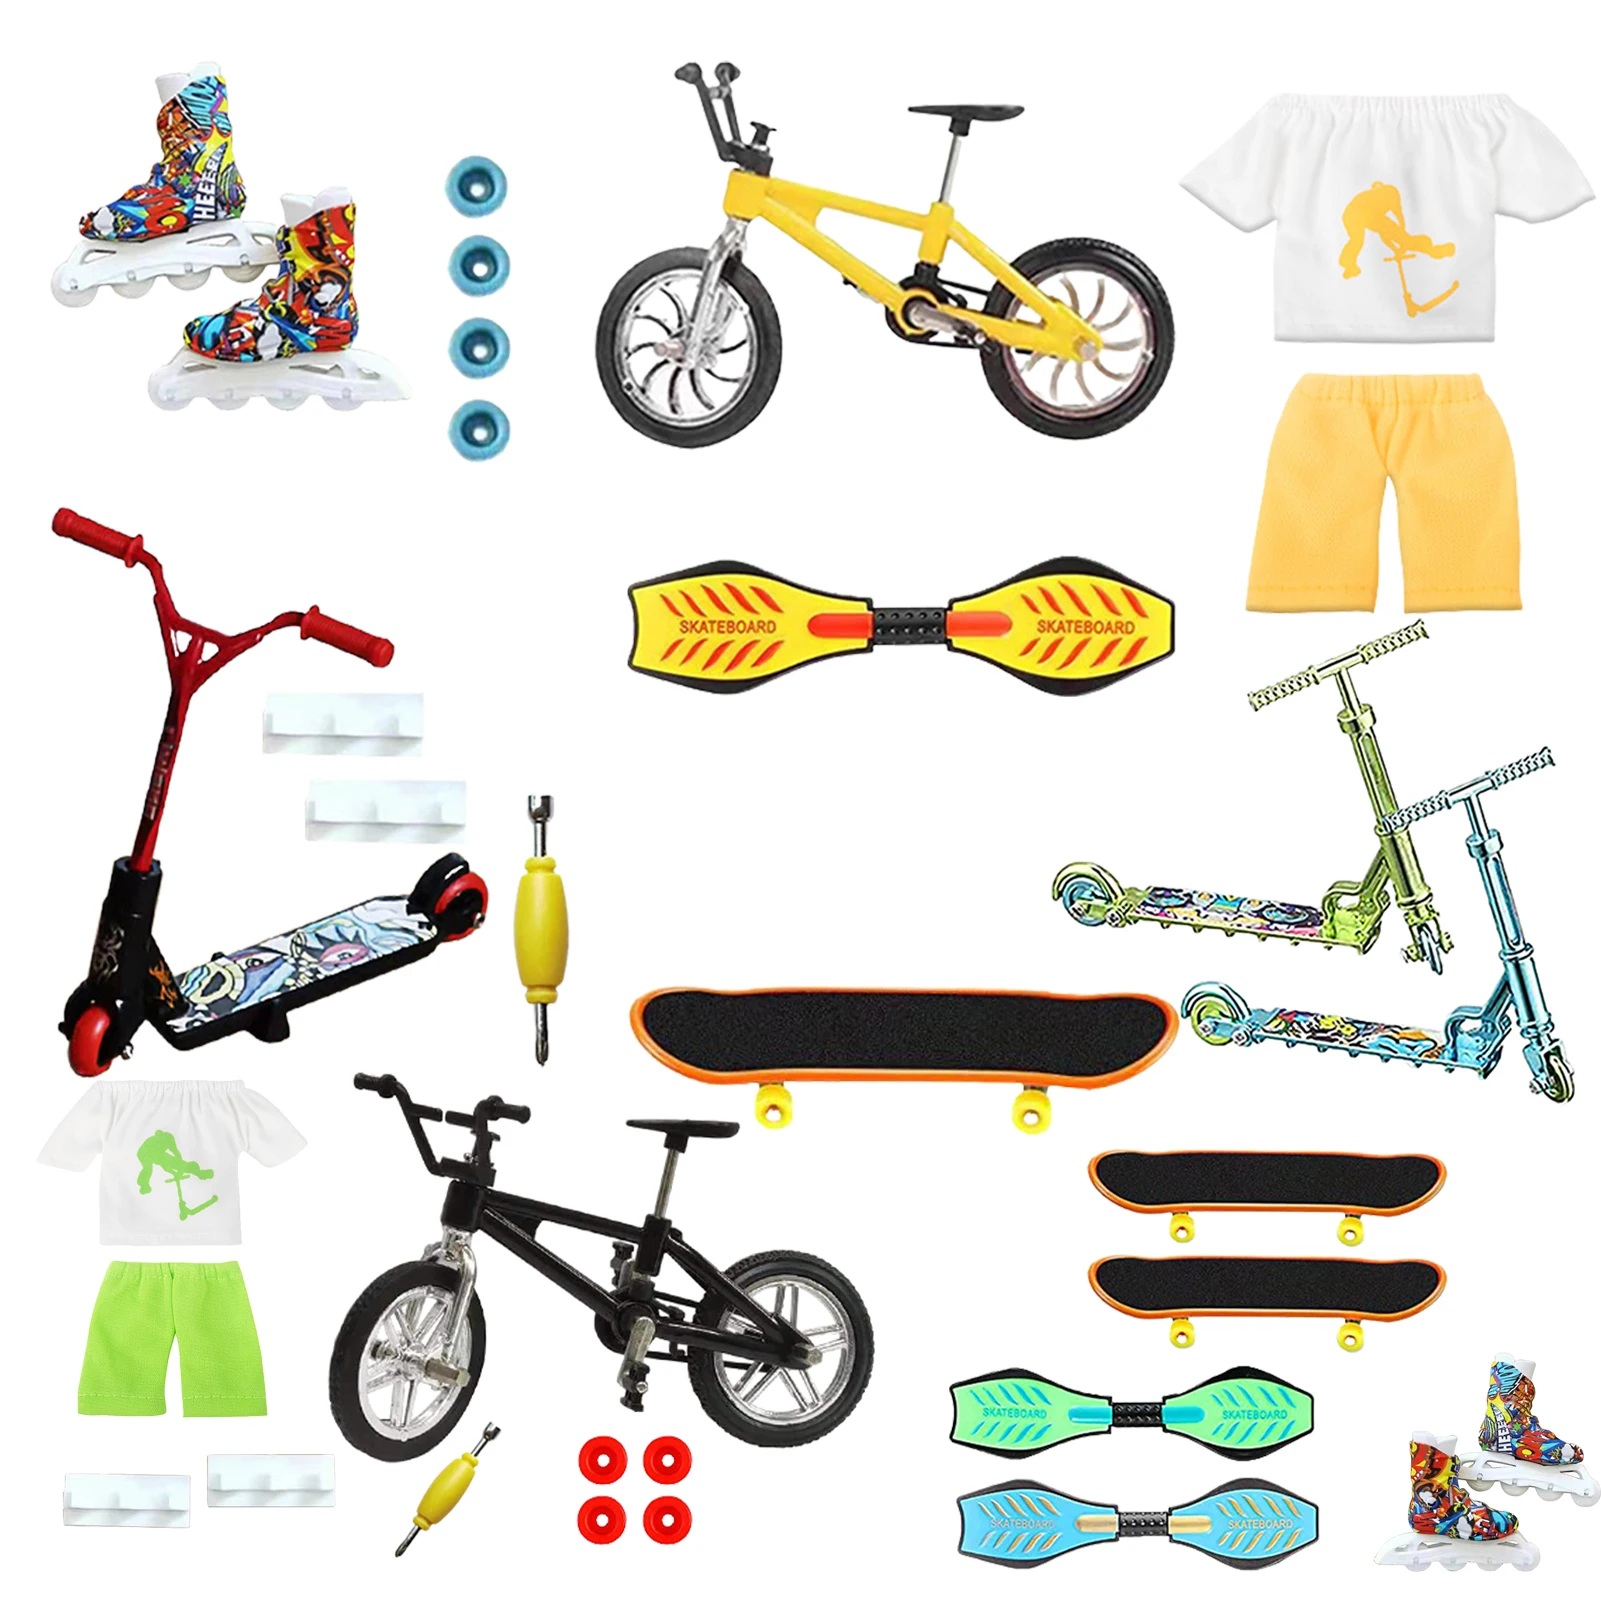 Mini Finger Scooter Fingertip Movement Novelty Toy Colorful Bike Parts Sets For Kids Christmas Birthday Creative Gifts